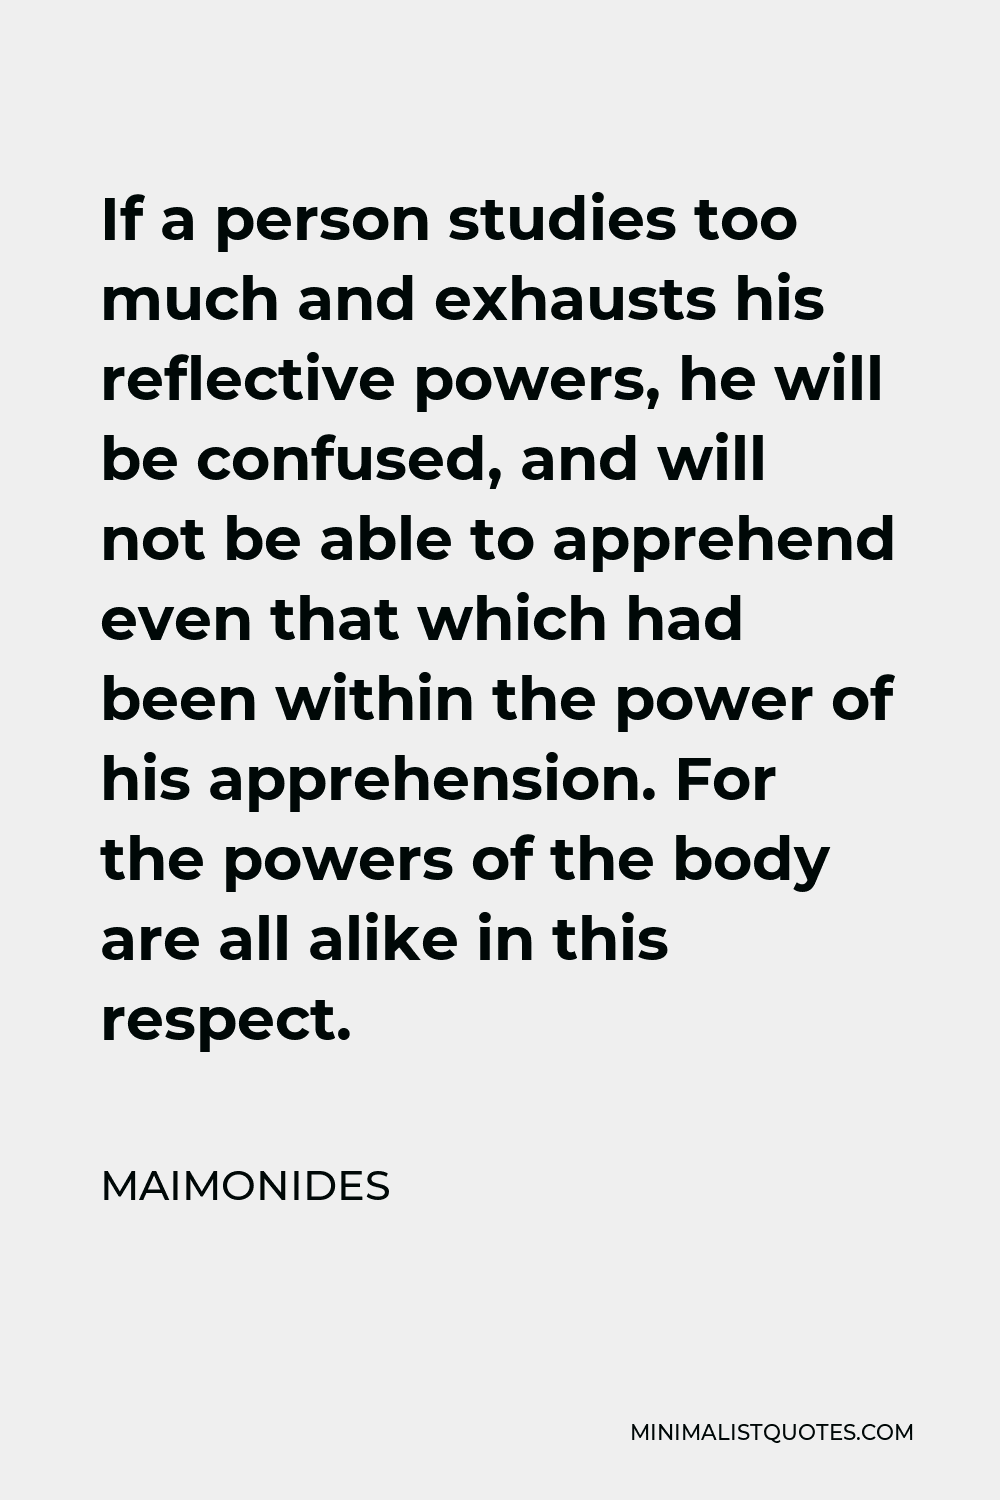 Maimonides Quote - If a person studies too much and exhausts his reflective powers, he will be confused, and will not be able to apprehend even that which had been within the power of his apprehension. For the powers of the body are all alike in this respect.